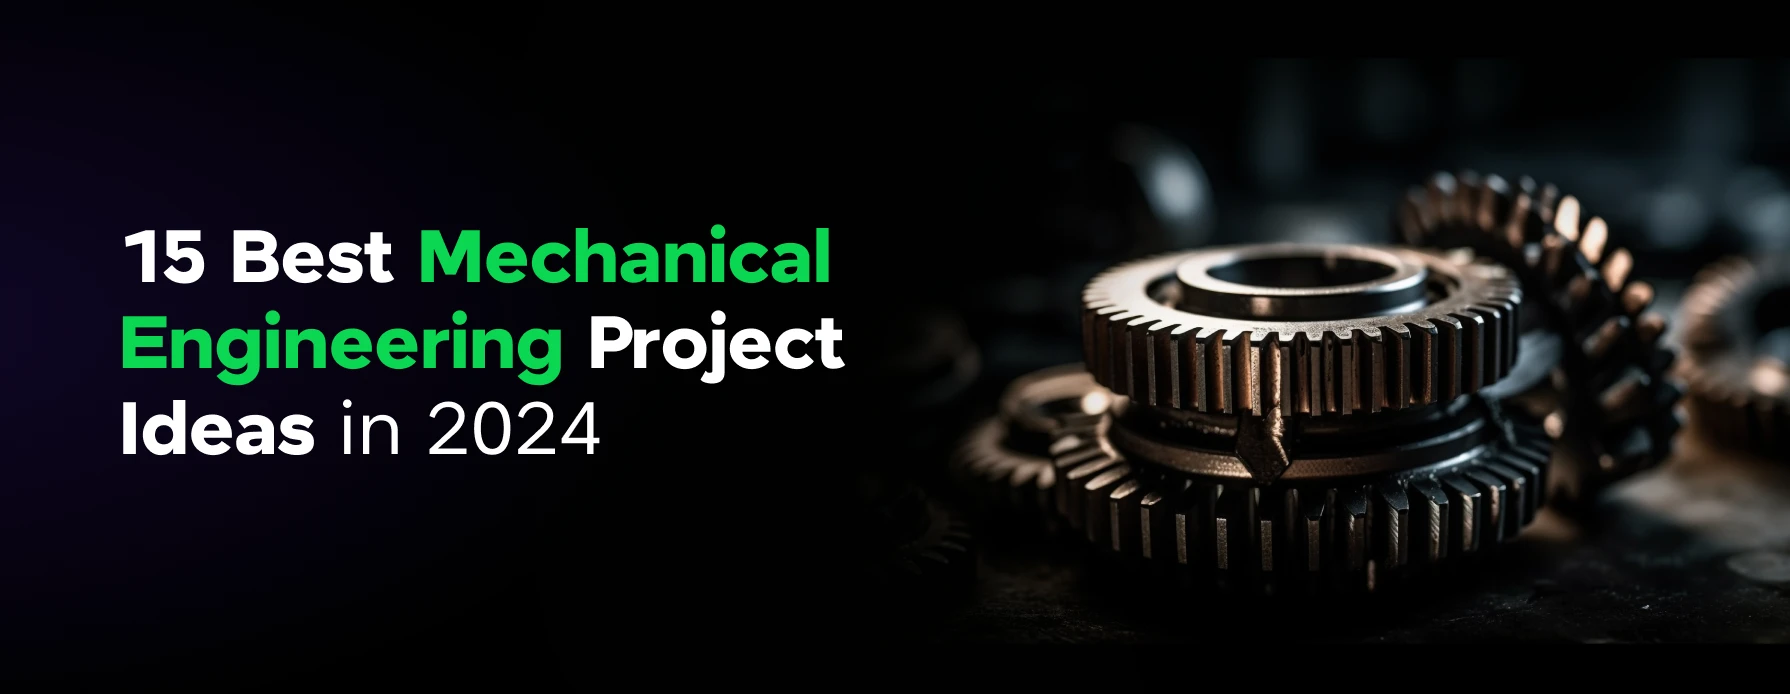 Feature image -Mechanical Engineering Project Ideas